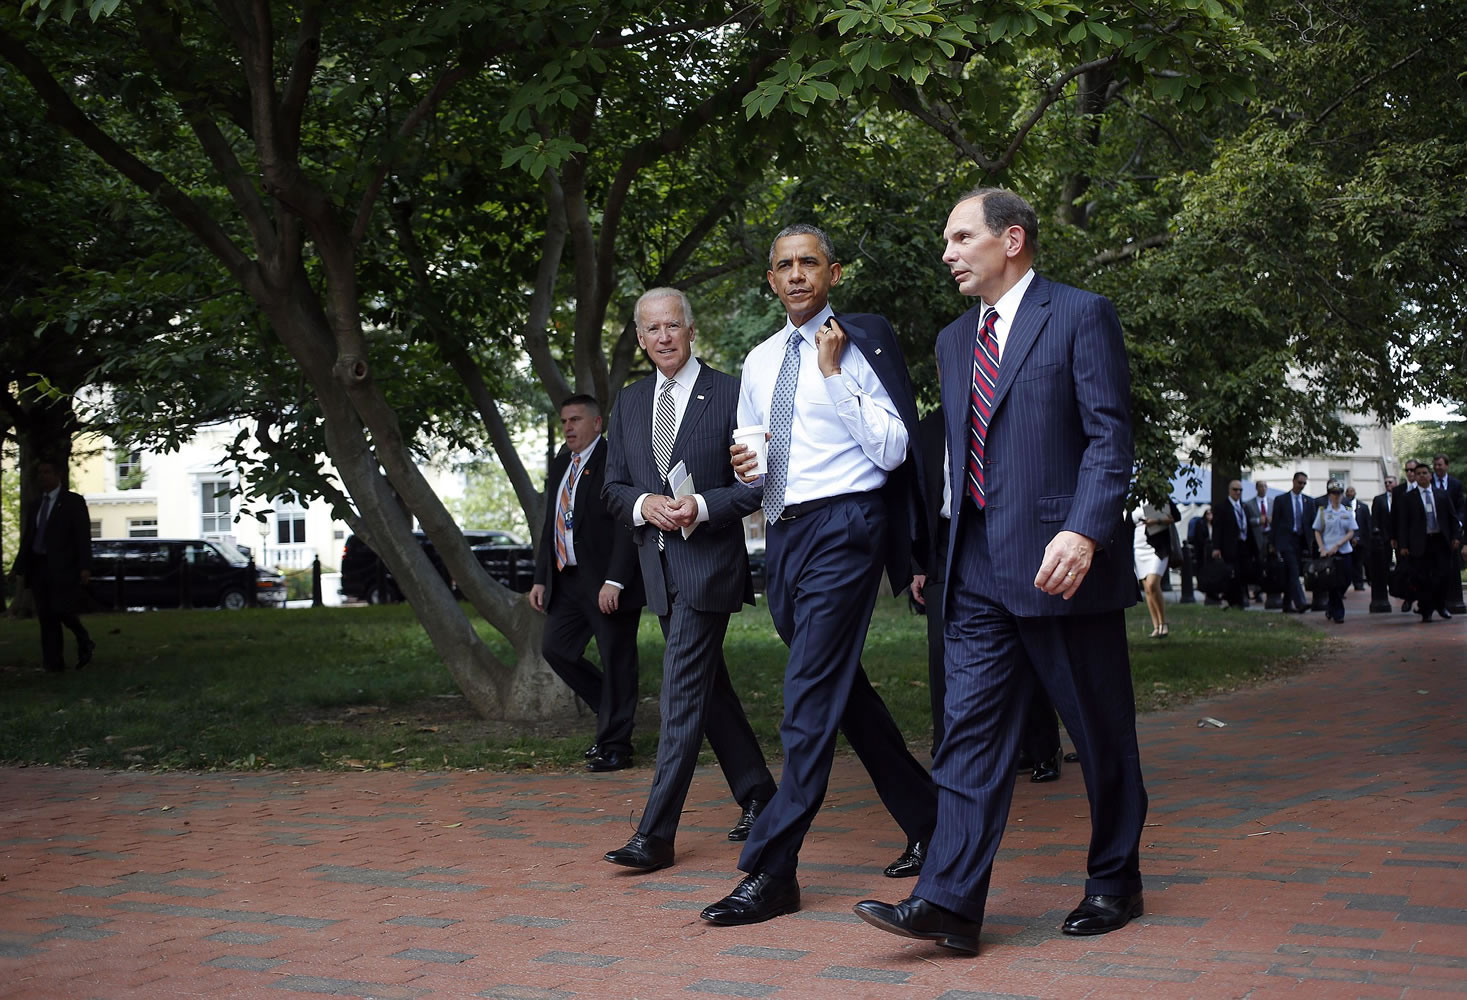 President Barack Obama and Vice President Joe Biden walk with Procter and Gamble executive Robert McDonald, Obama's nominee as the next Veterans Affairs secretary, from the Department of Veterans Affairs across Lafayette Park back to the White House in Washington, Monday, June 30, 2014. If confirmed by the Senate, McDonald would succeed Eric Shinseki, the retired four-star general who resigned last month as the scope of the issues at veterans' hospitals became apparent.